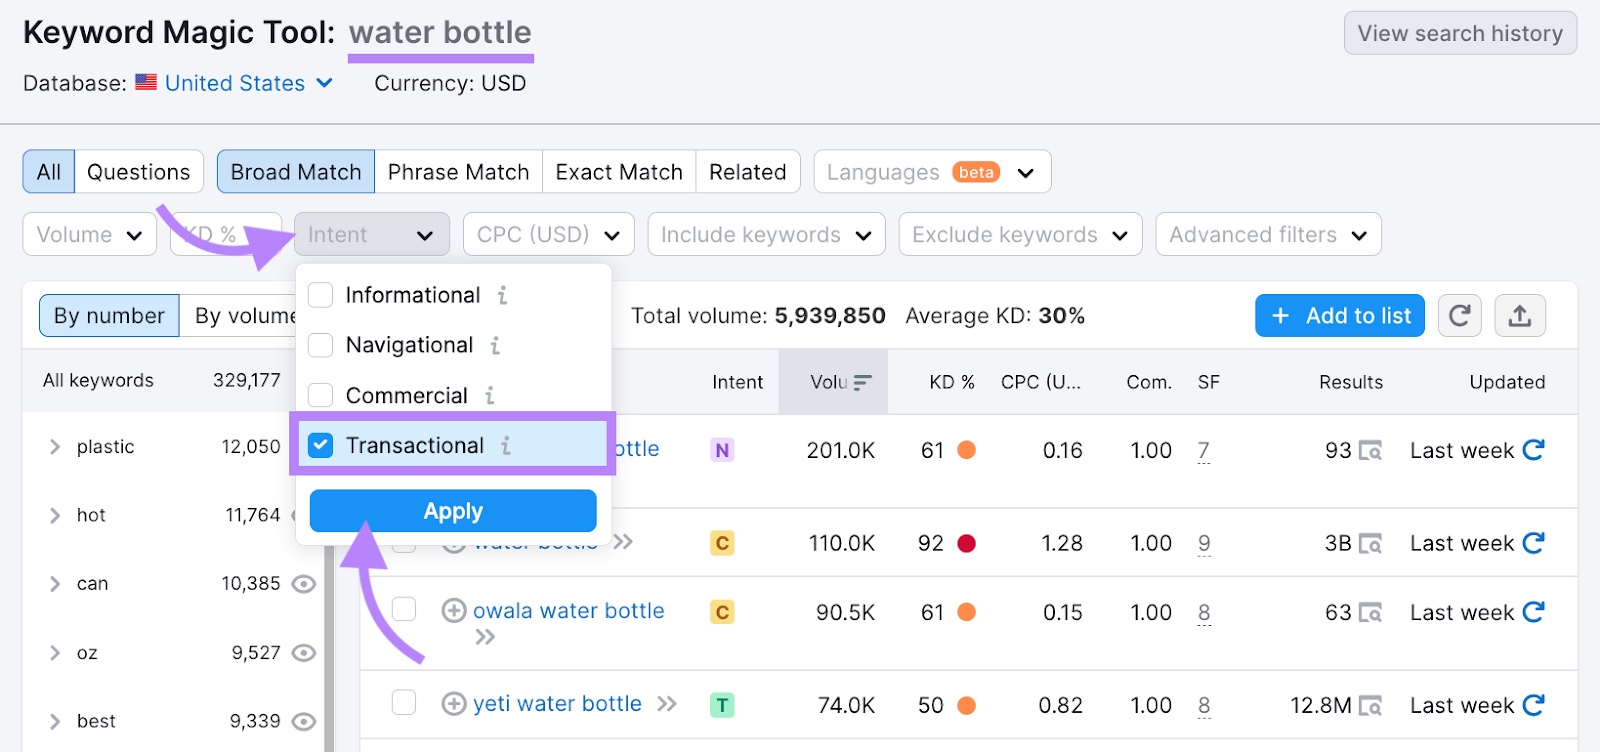 filter for transactional search intent in Keyword Magic Tool results for "water bottle" keyword